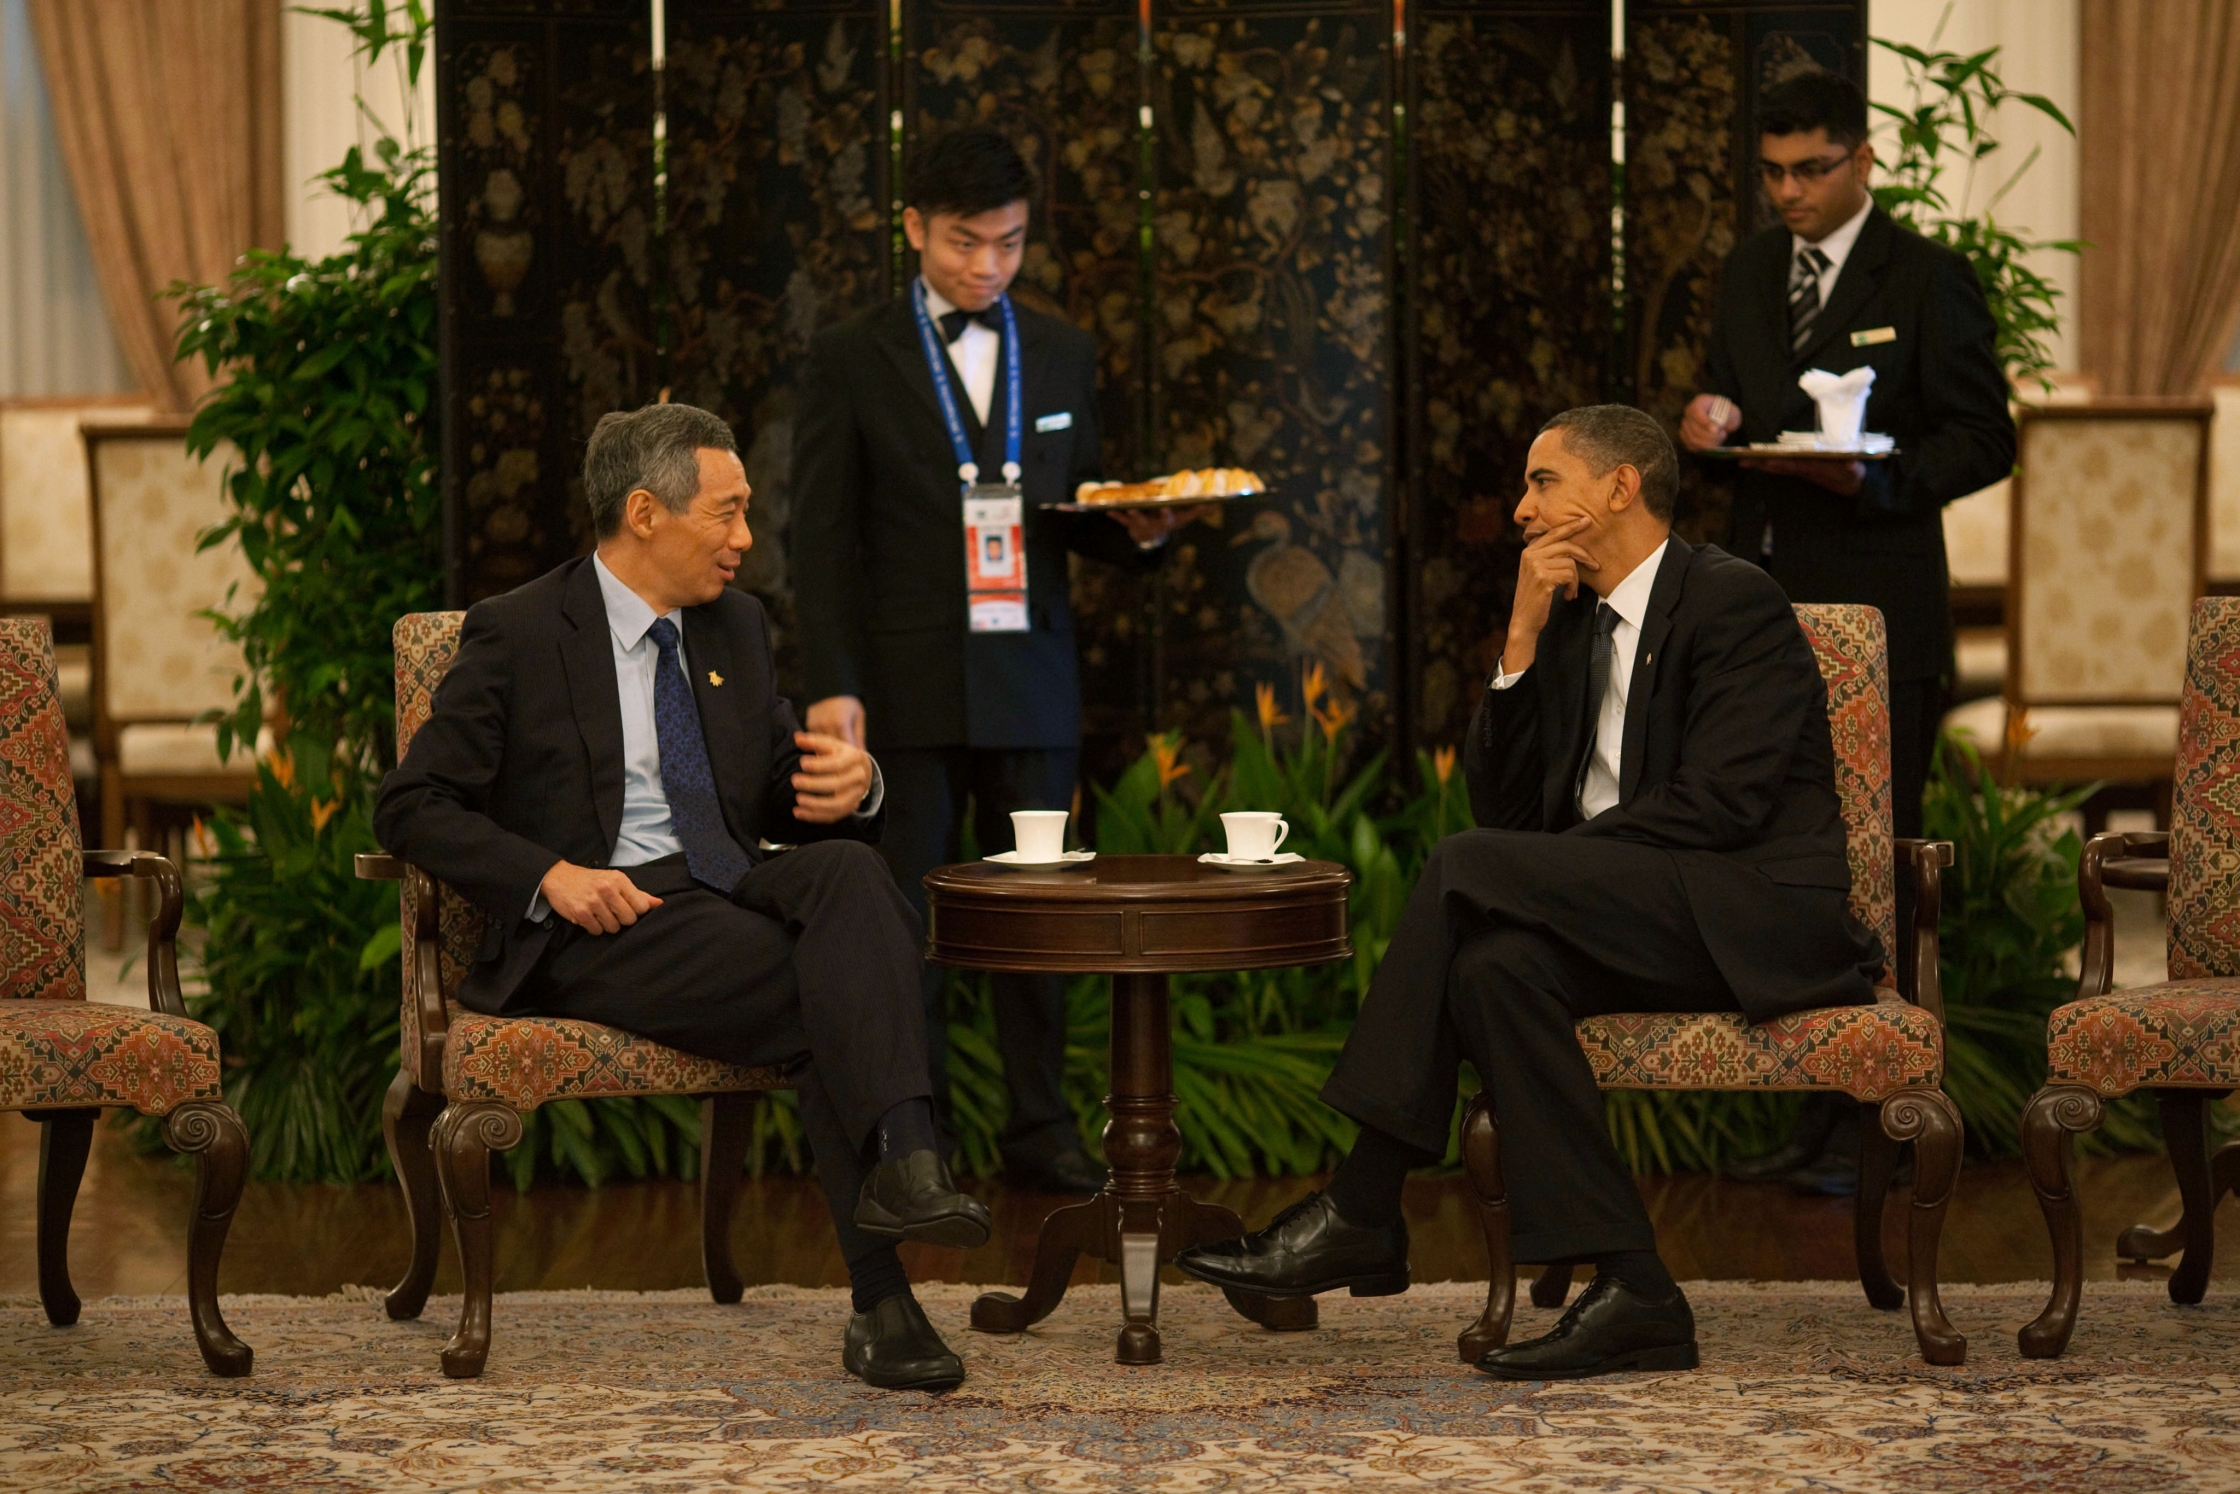 President Obama and Prime Minister Lee of Singapore in 2009